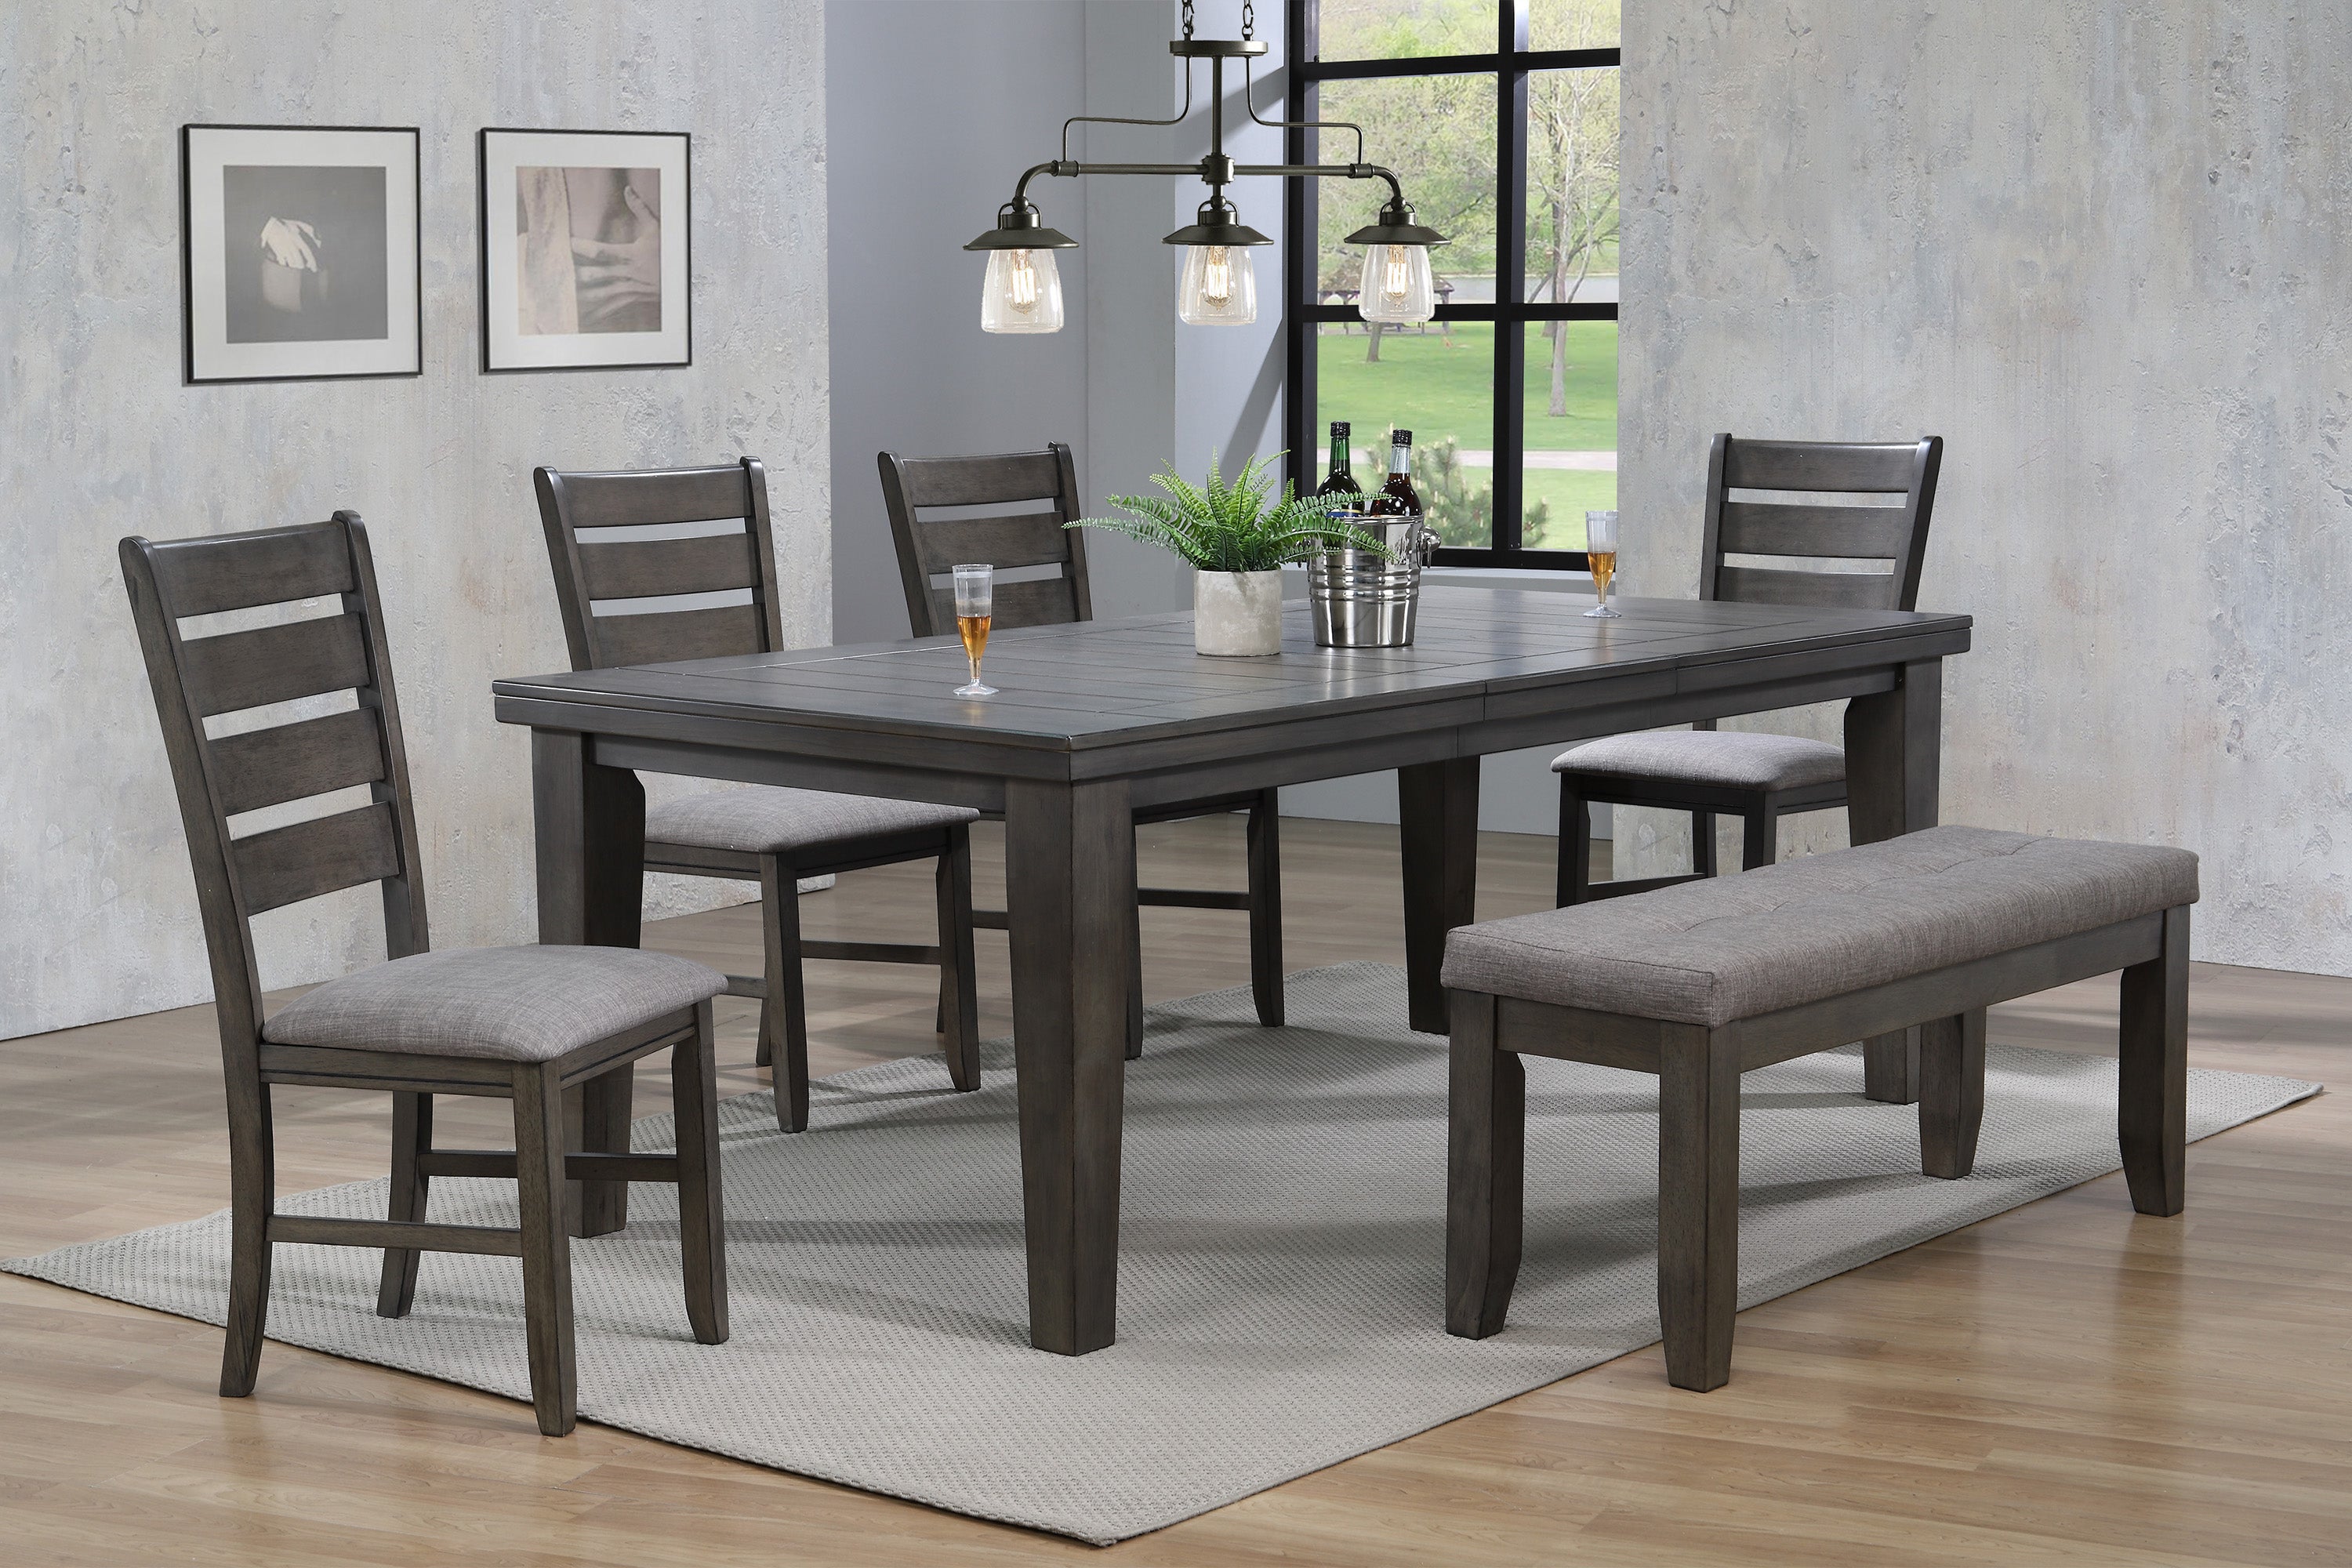 Gray Dining Room Set With Bench